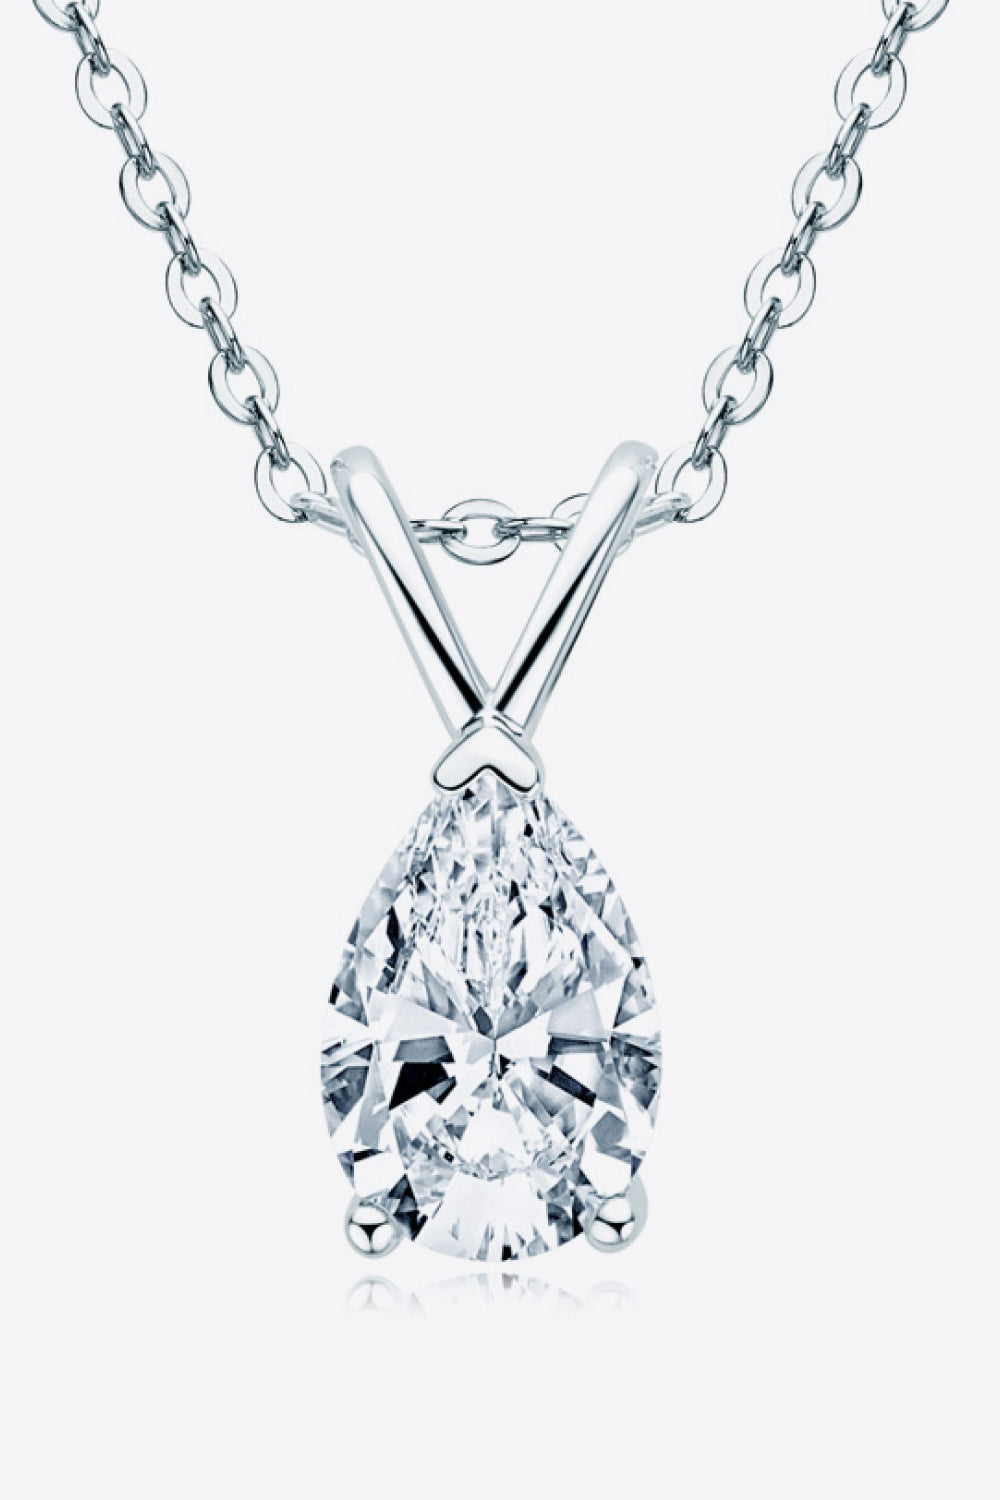 1.5 Carat Moissanite Pendant 925 Sterling Silver Necklace Silver One Size